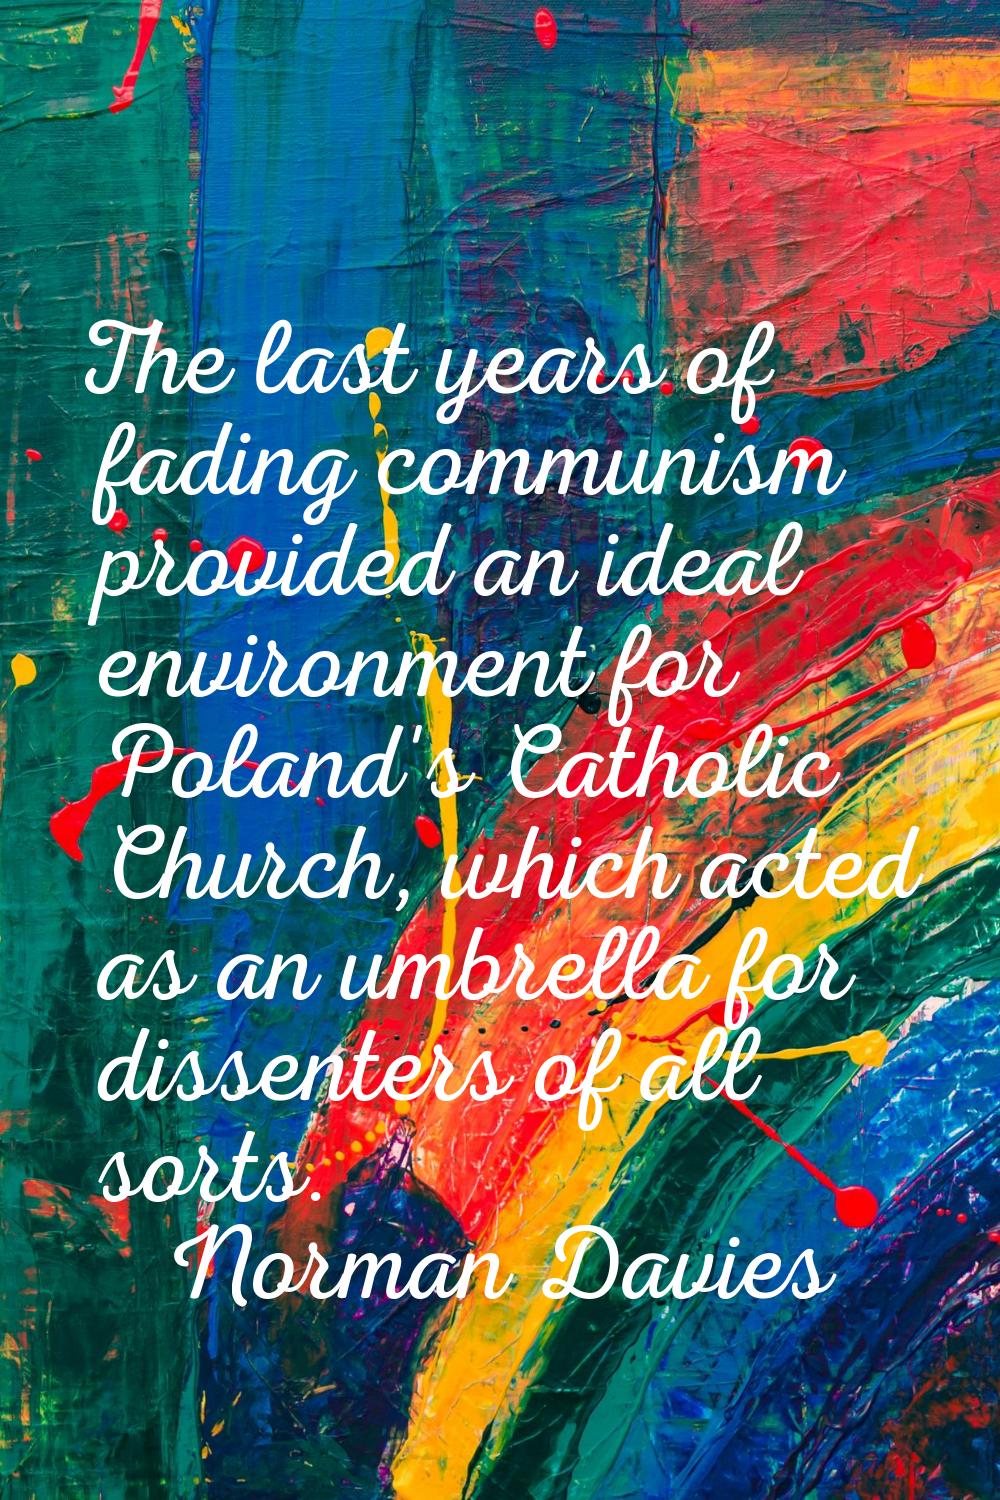 The last years of fading communism provided an ideal environment for Poland's Catholic Church, whic